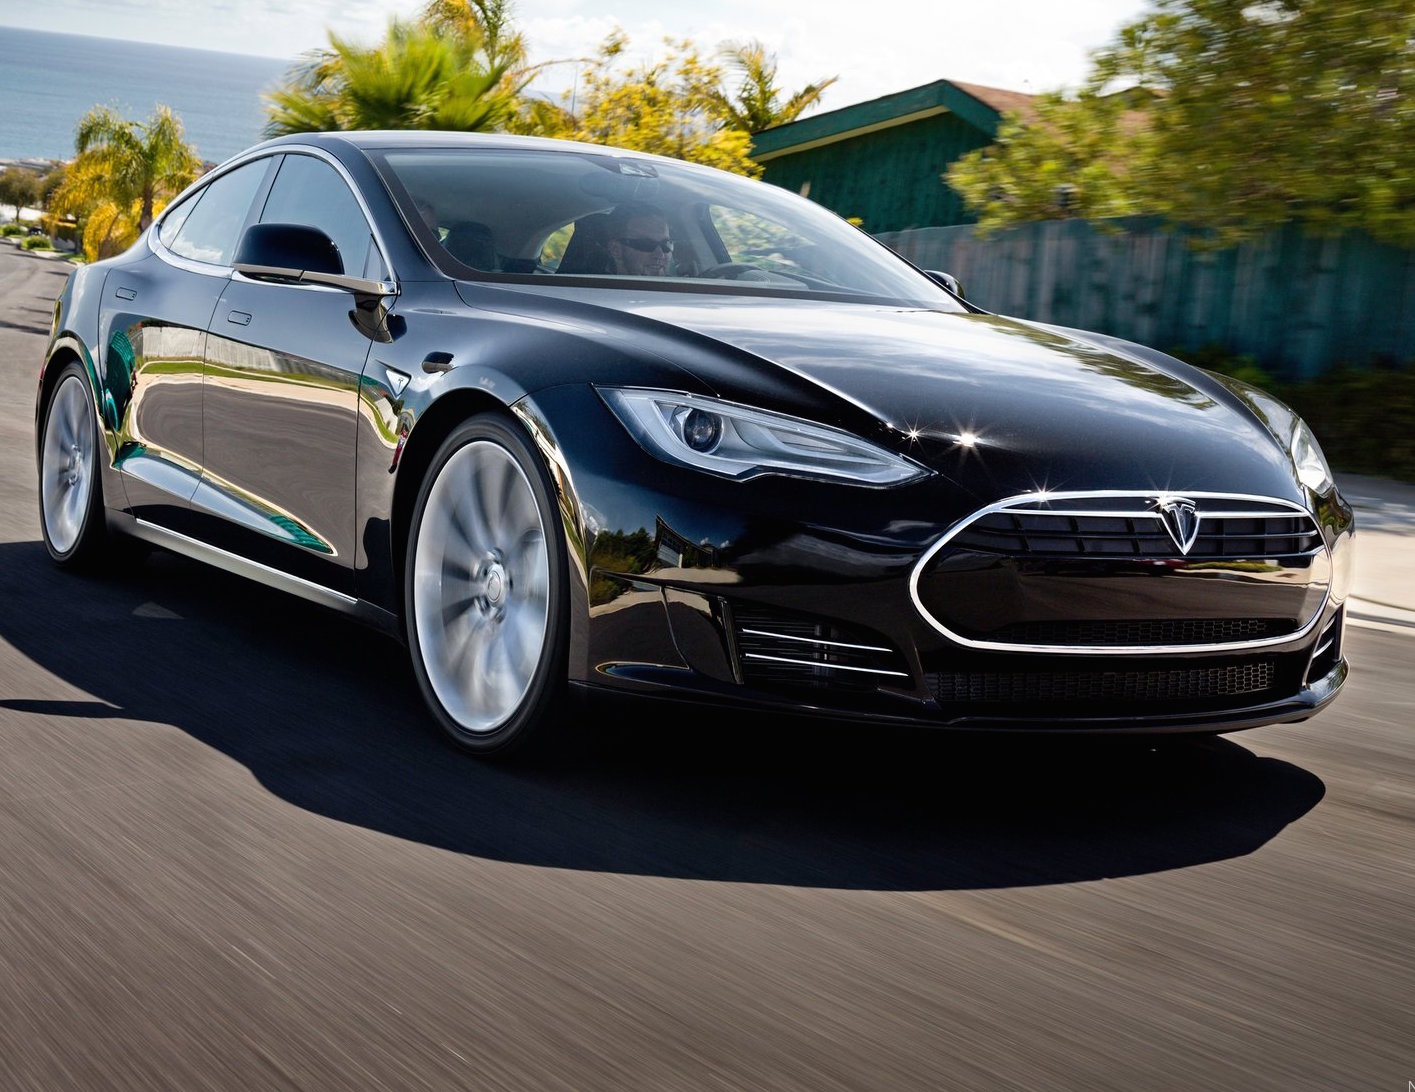 2016 tesla model s s new ludicrous mode 0 100 kmh in under 3 0 seconds 1 1 g under acceleration